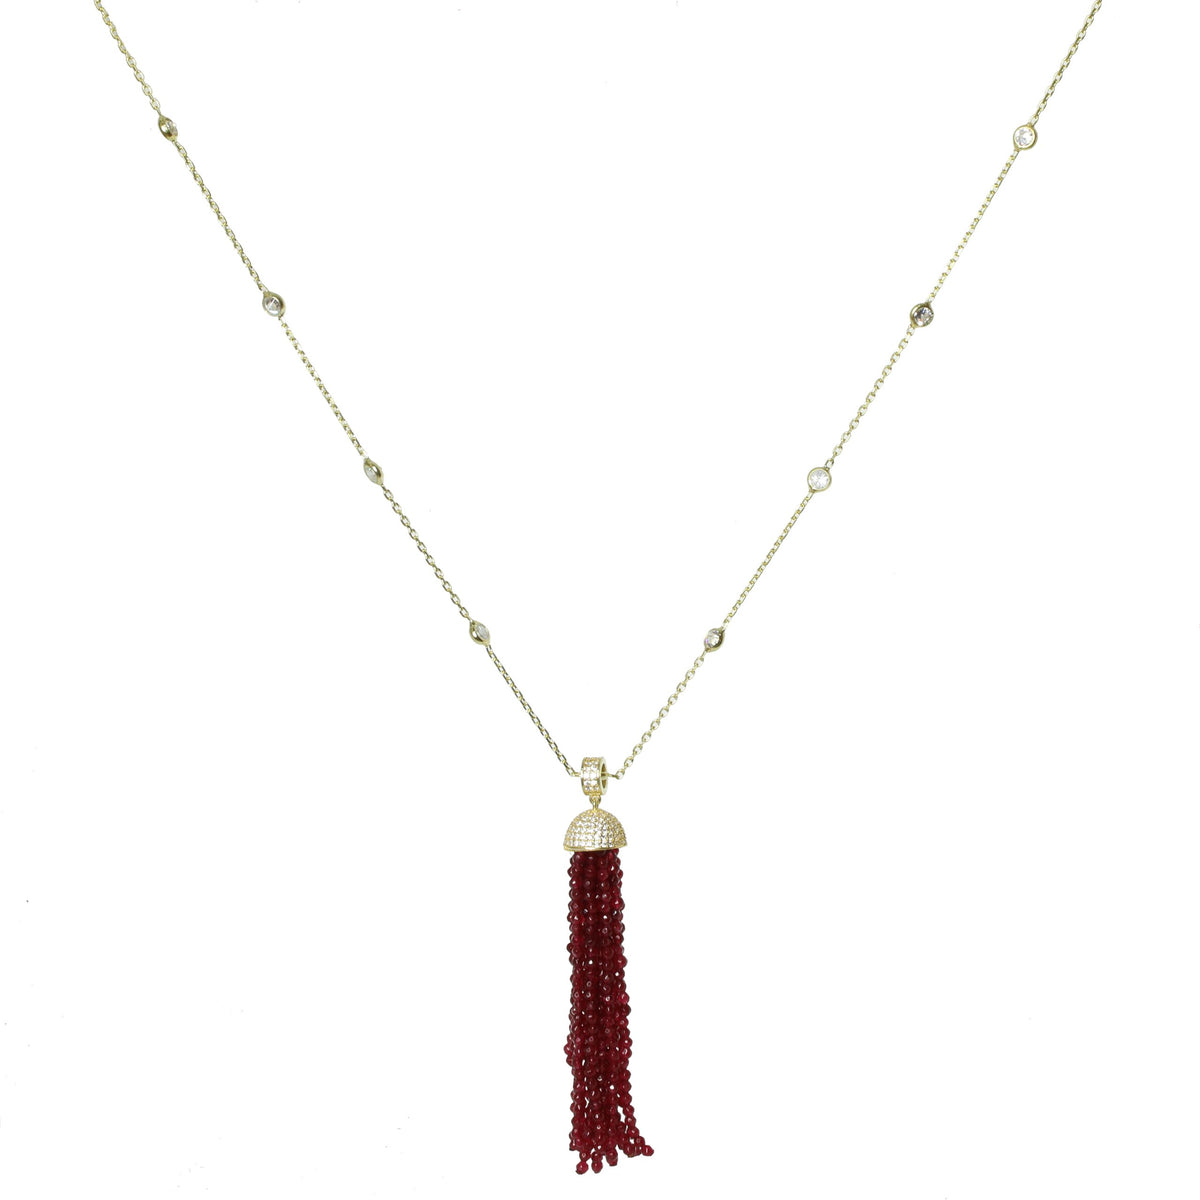 Vintage Long Crystal Necklace with Natural Red Agate Beads Tassel